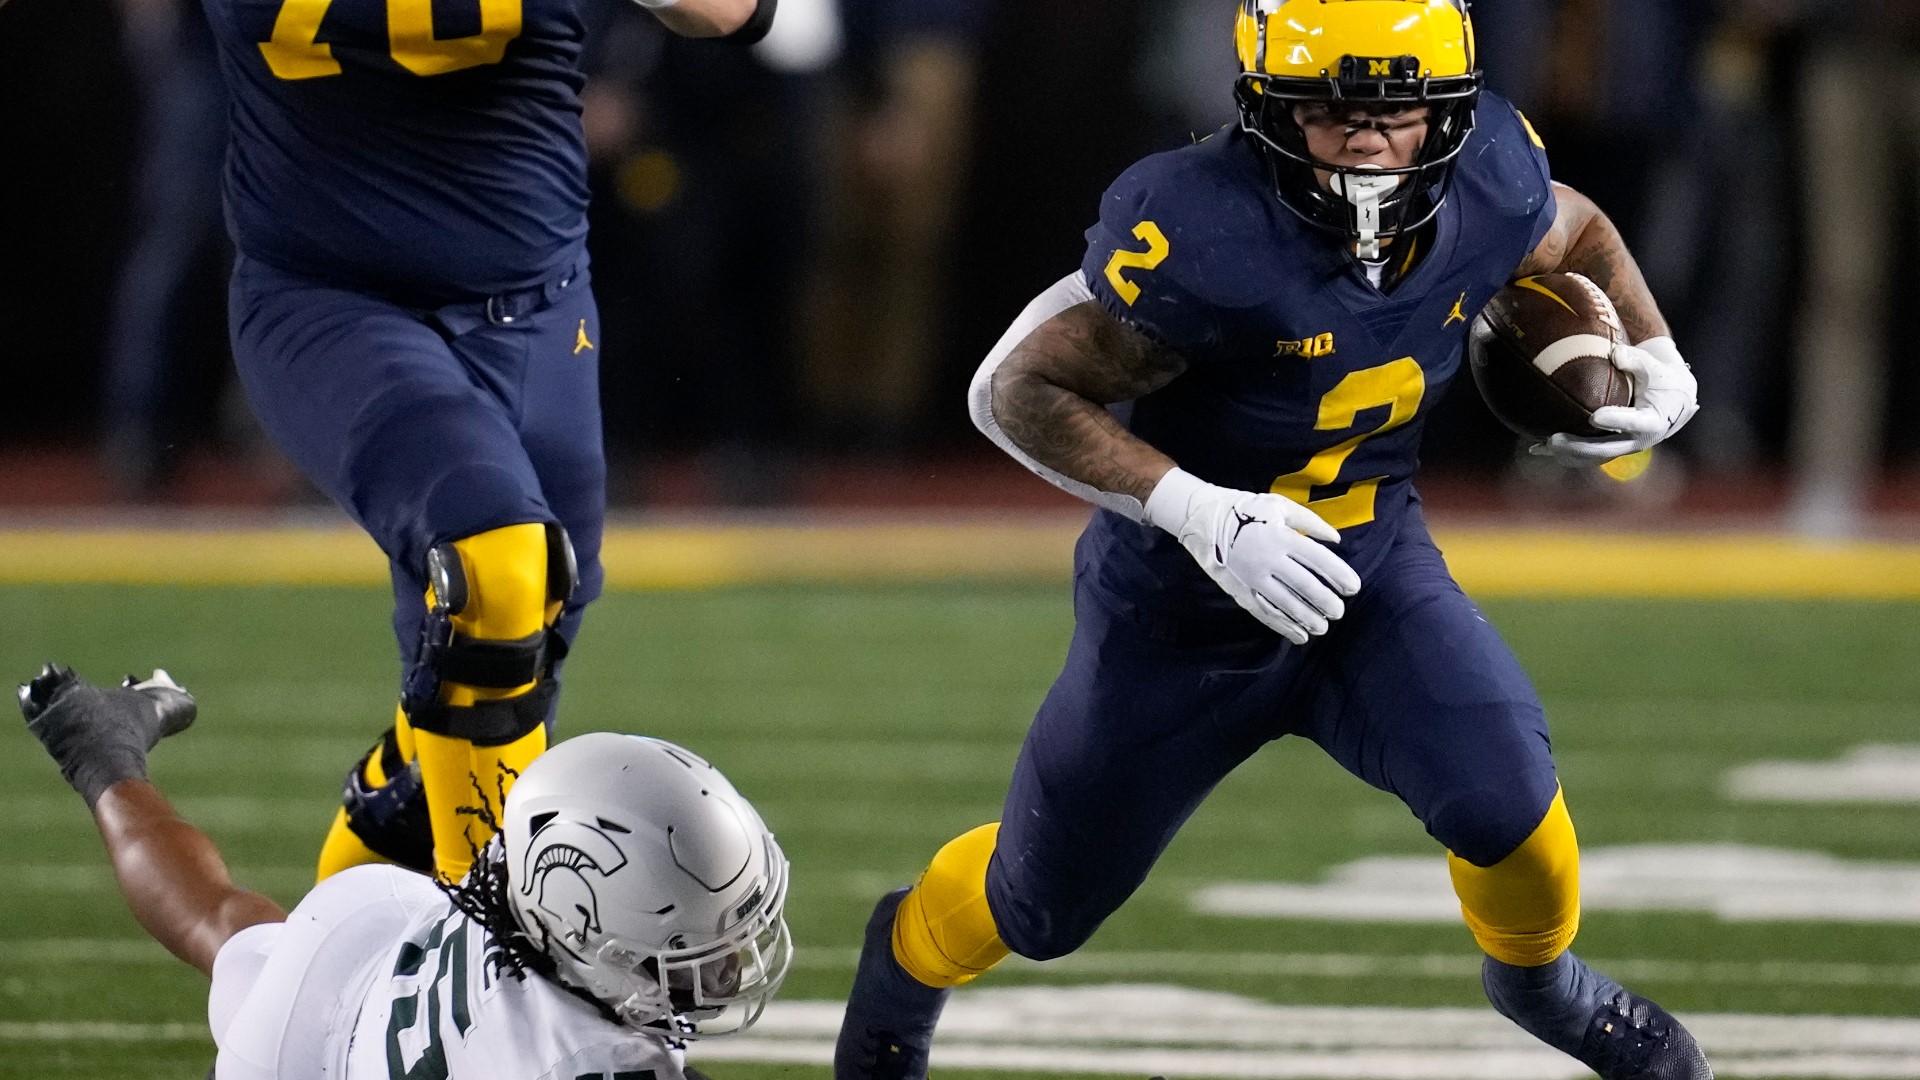 Blake Corum ran for 177 yards and scored twice, and Jake Moody made five field goals to help No. 4 Michigan remain unbeaten with a 29-7 win over Michigan State.